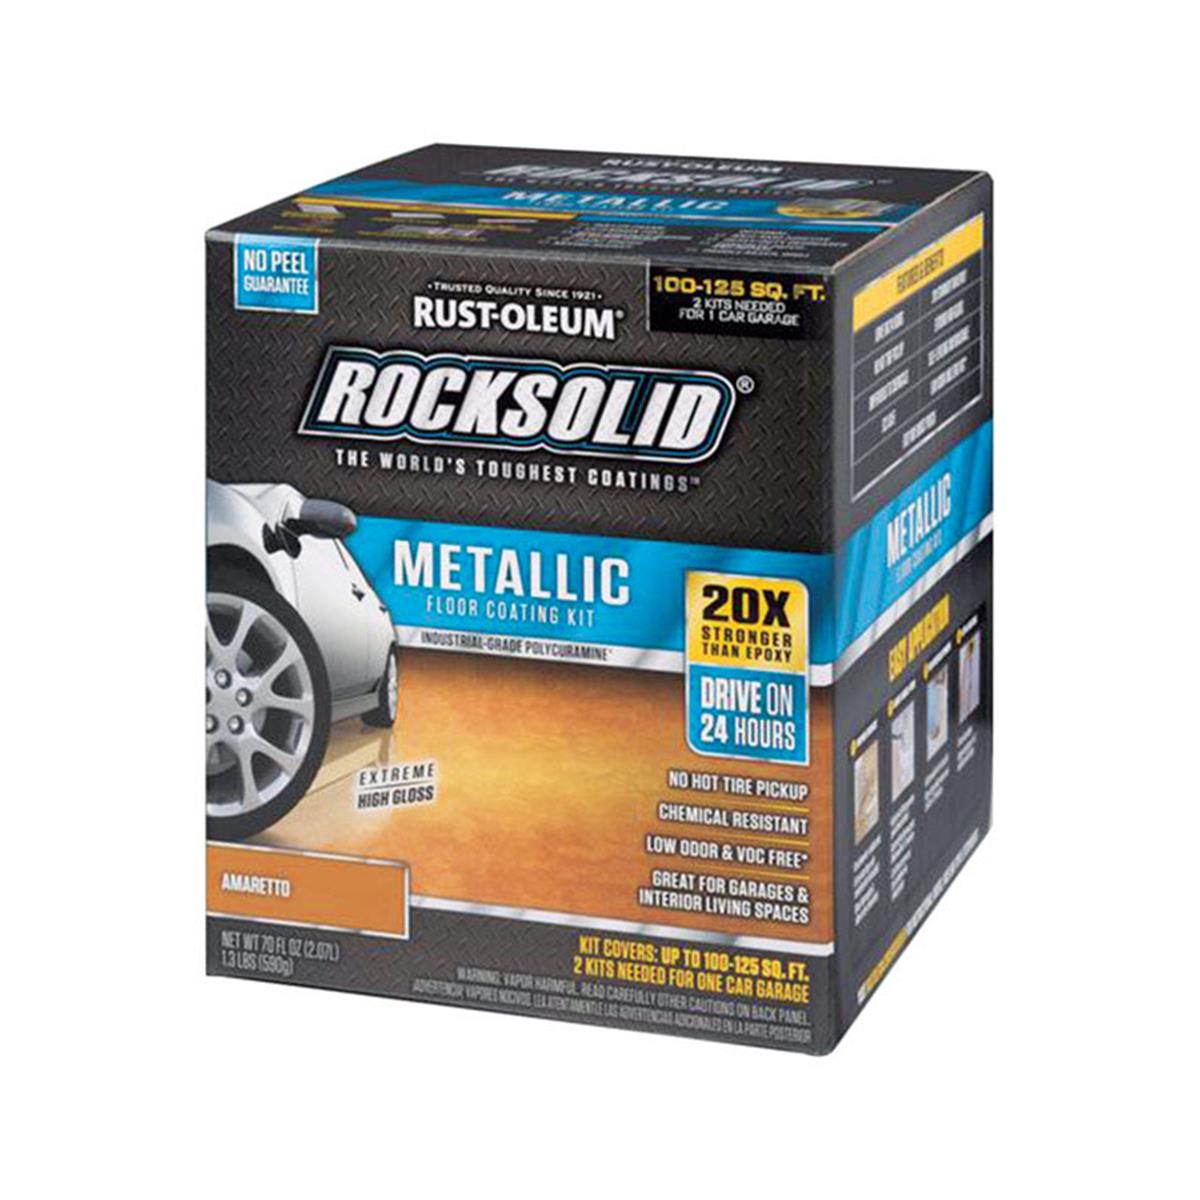 1624170 70 Oz Rocksolid Floor Coating Kit Extreme High Gloss Amaretto, Pack Of 2